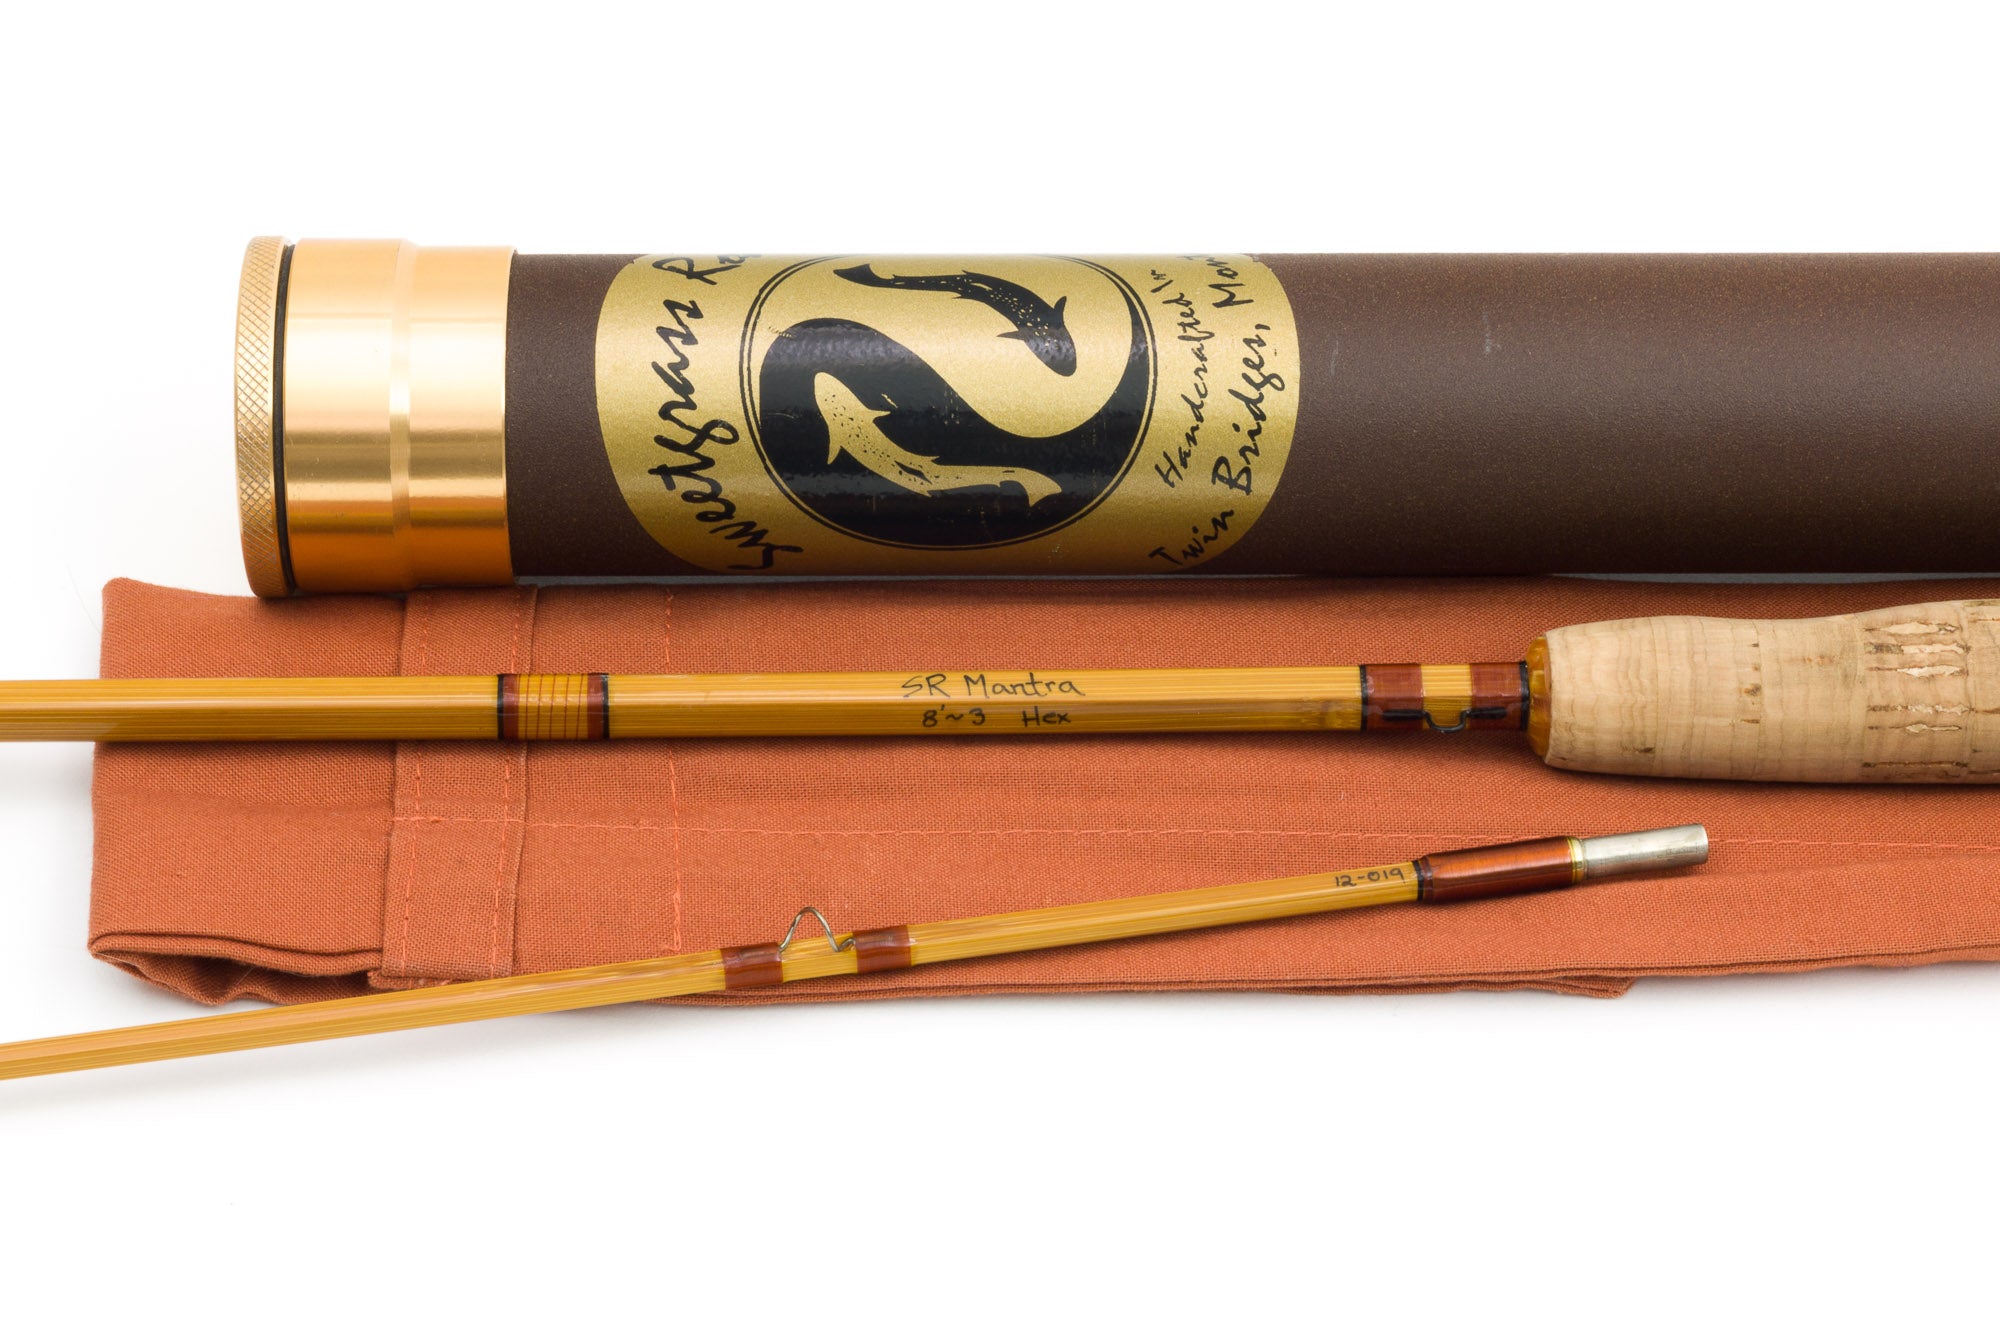 Sweetgrass Rods - Mantra 8' 3wt, 2/1 Bamboo Fly Rod